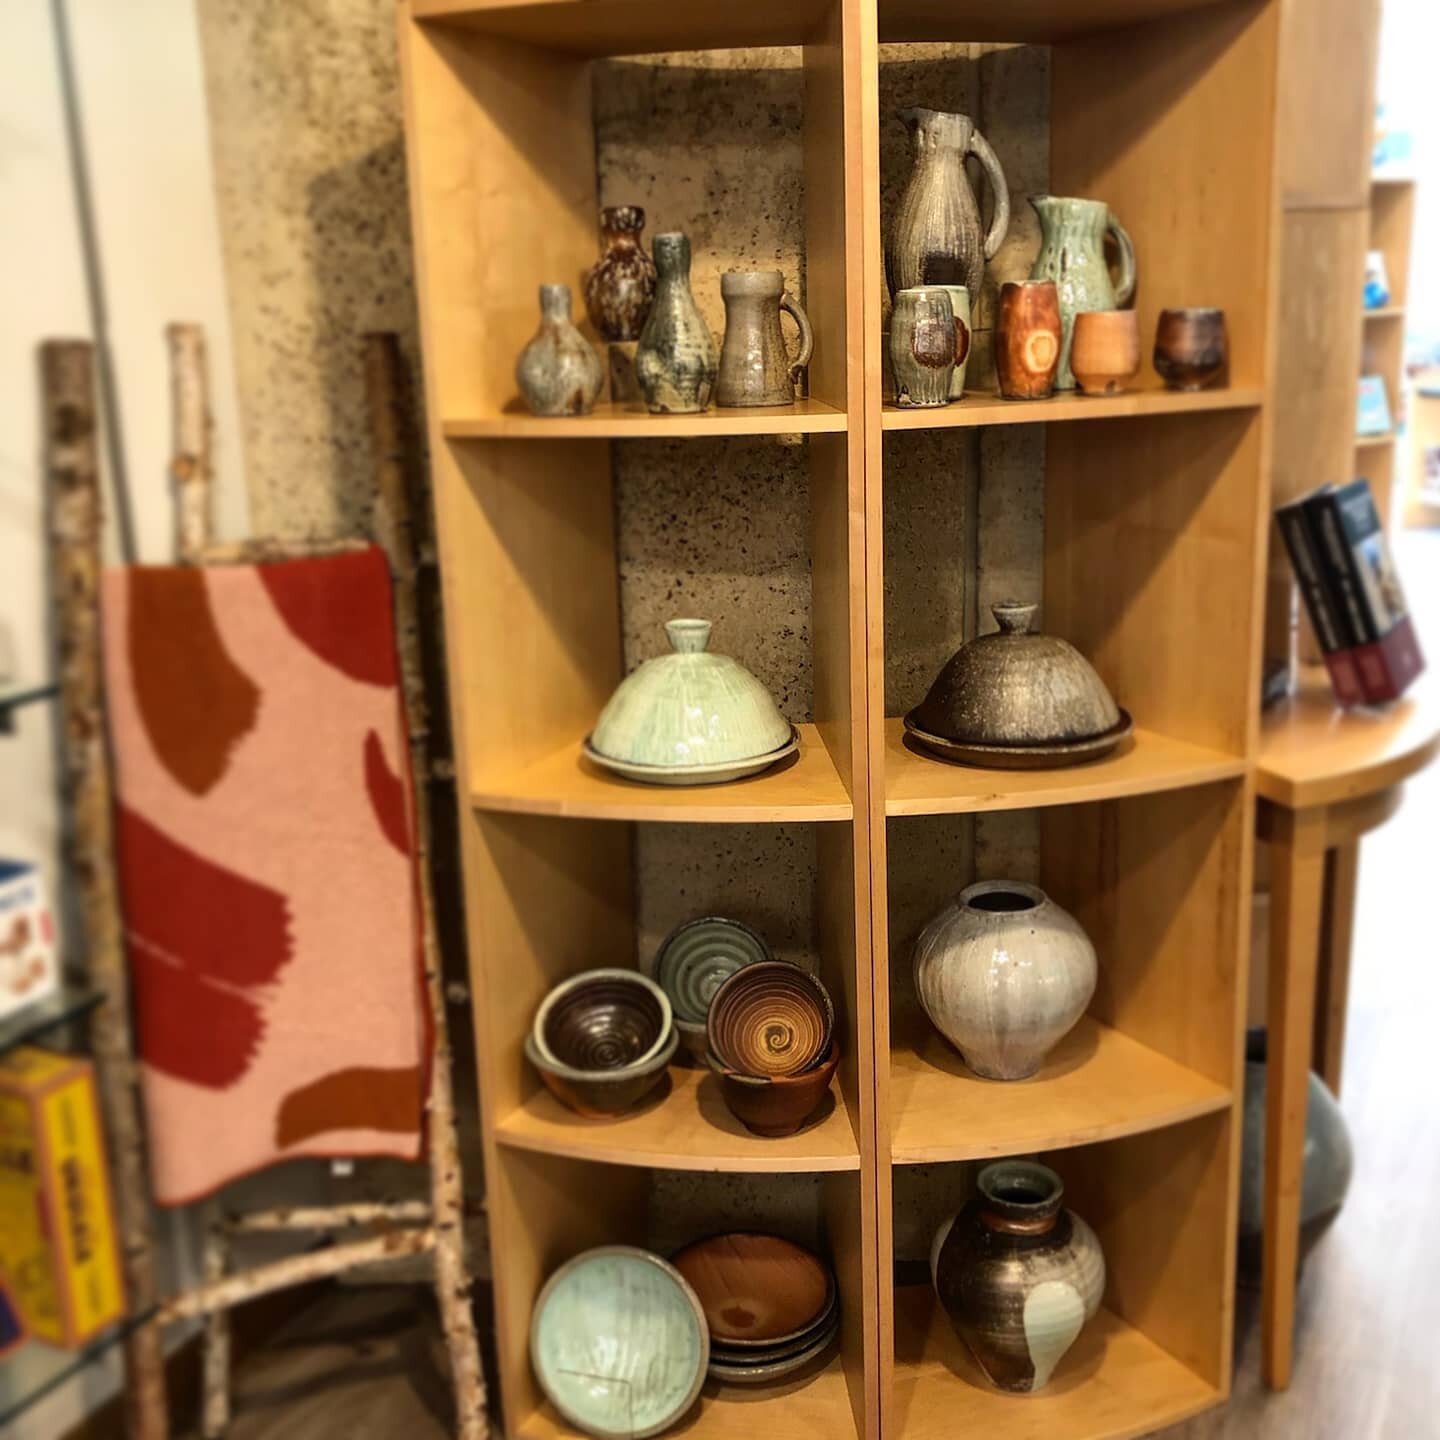 If you find yourself in Charlotte, head over to the Mint Museum gift shop! They just started carrying a nice selection of my work.

@mintmuseumstores #firstmuseumstore #museumstore #pottery #sodafired